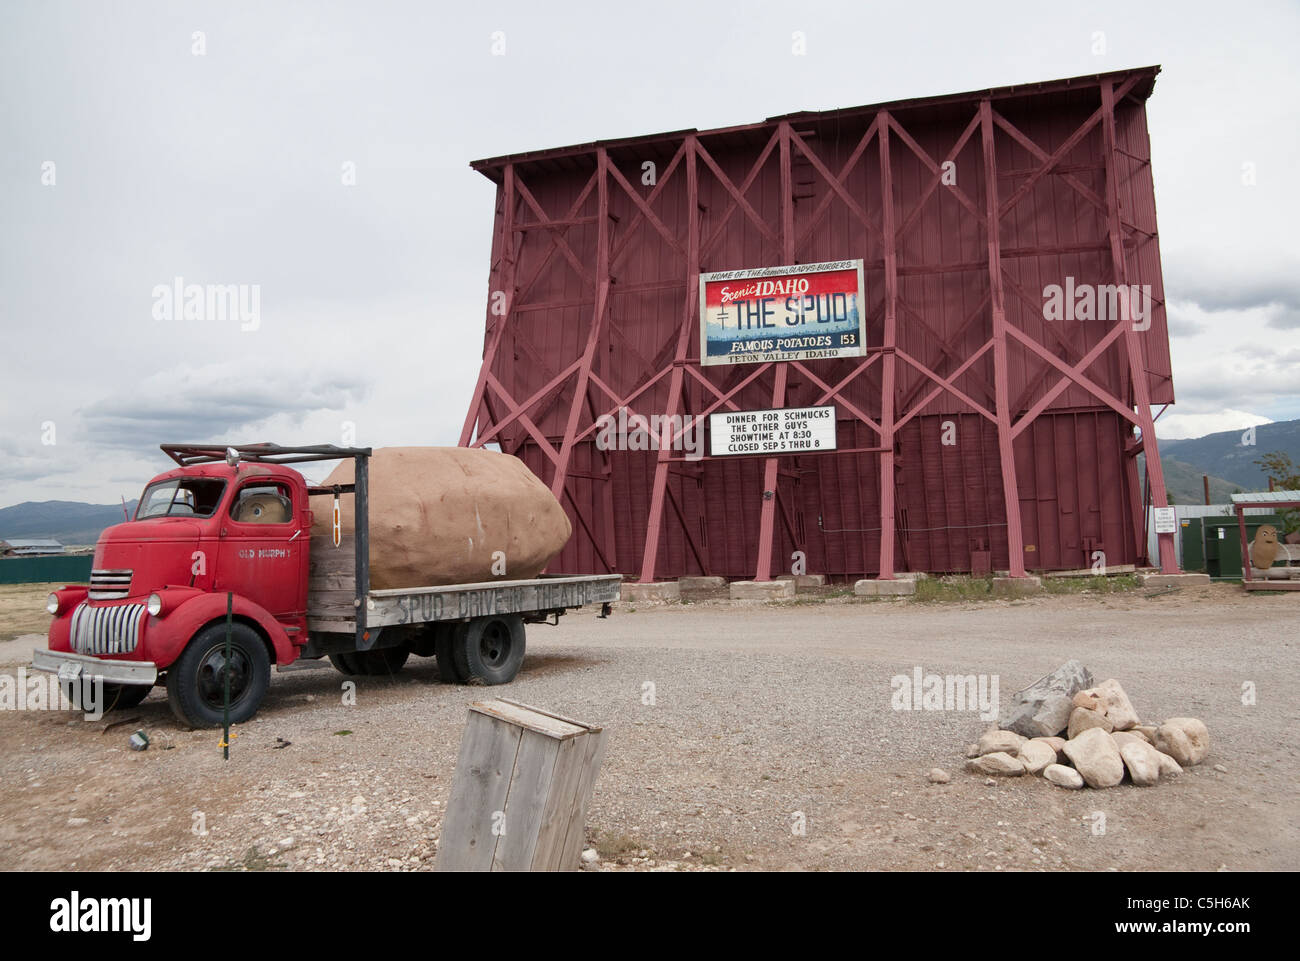 Came upon this unique drive-in theater in Driggs, Idaho, USA, utilizing the states fame for great 'spud' potatoes. Stock Photo